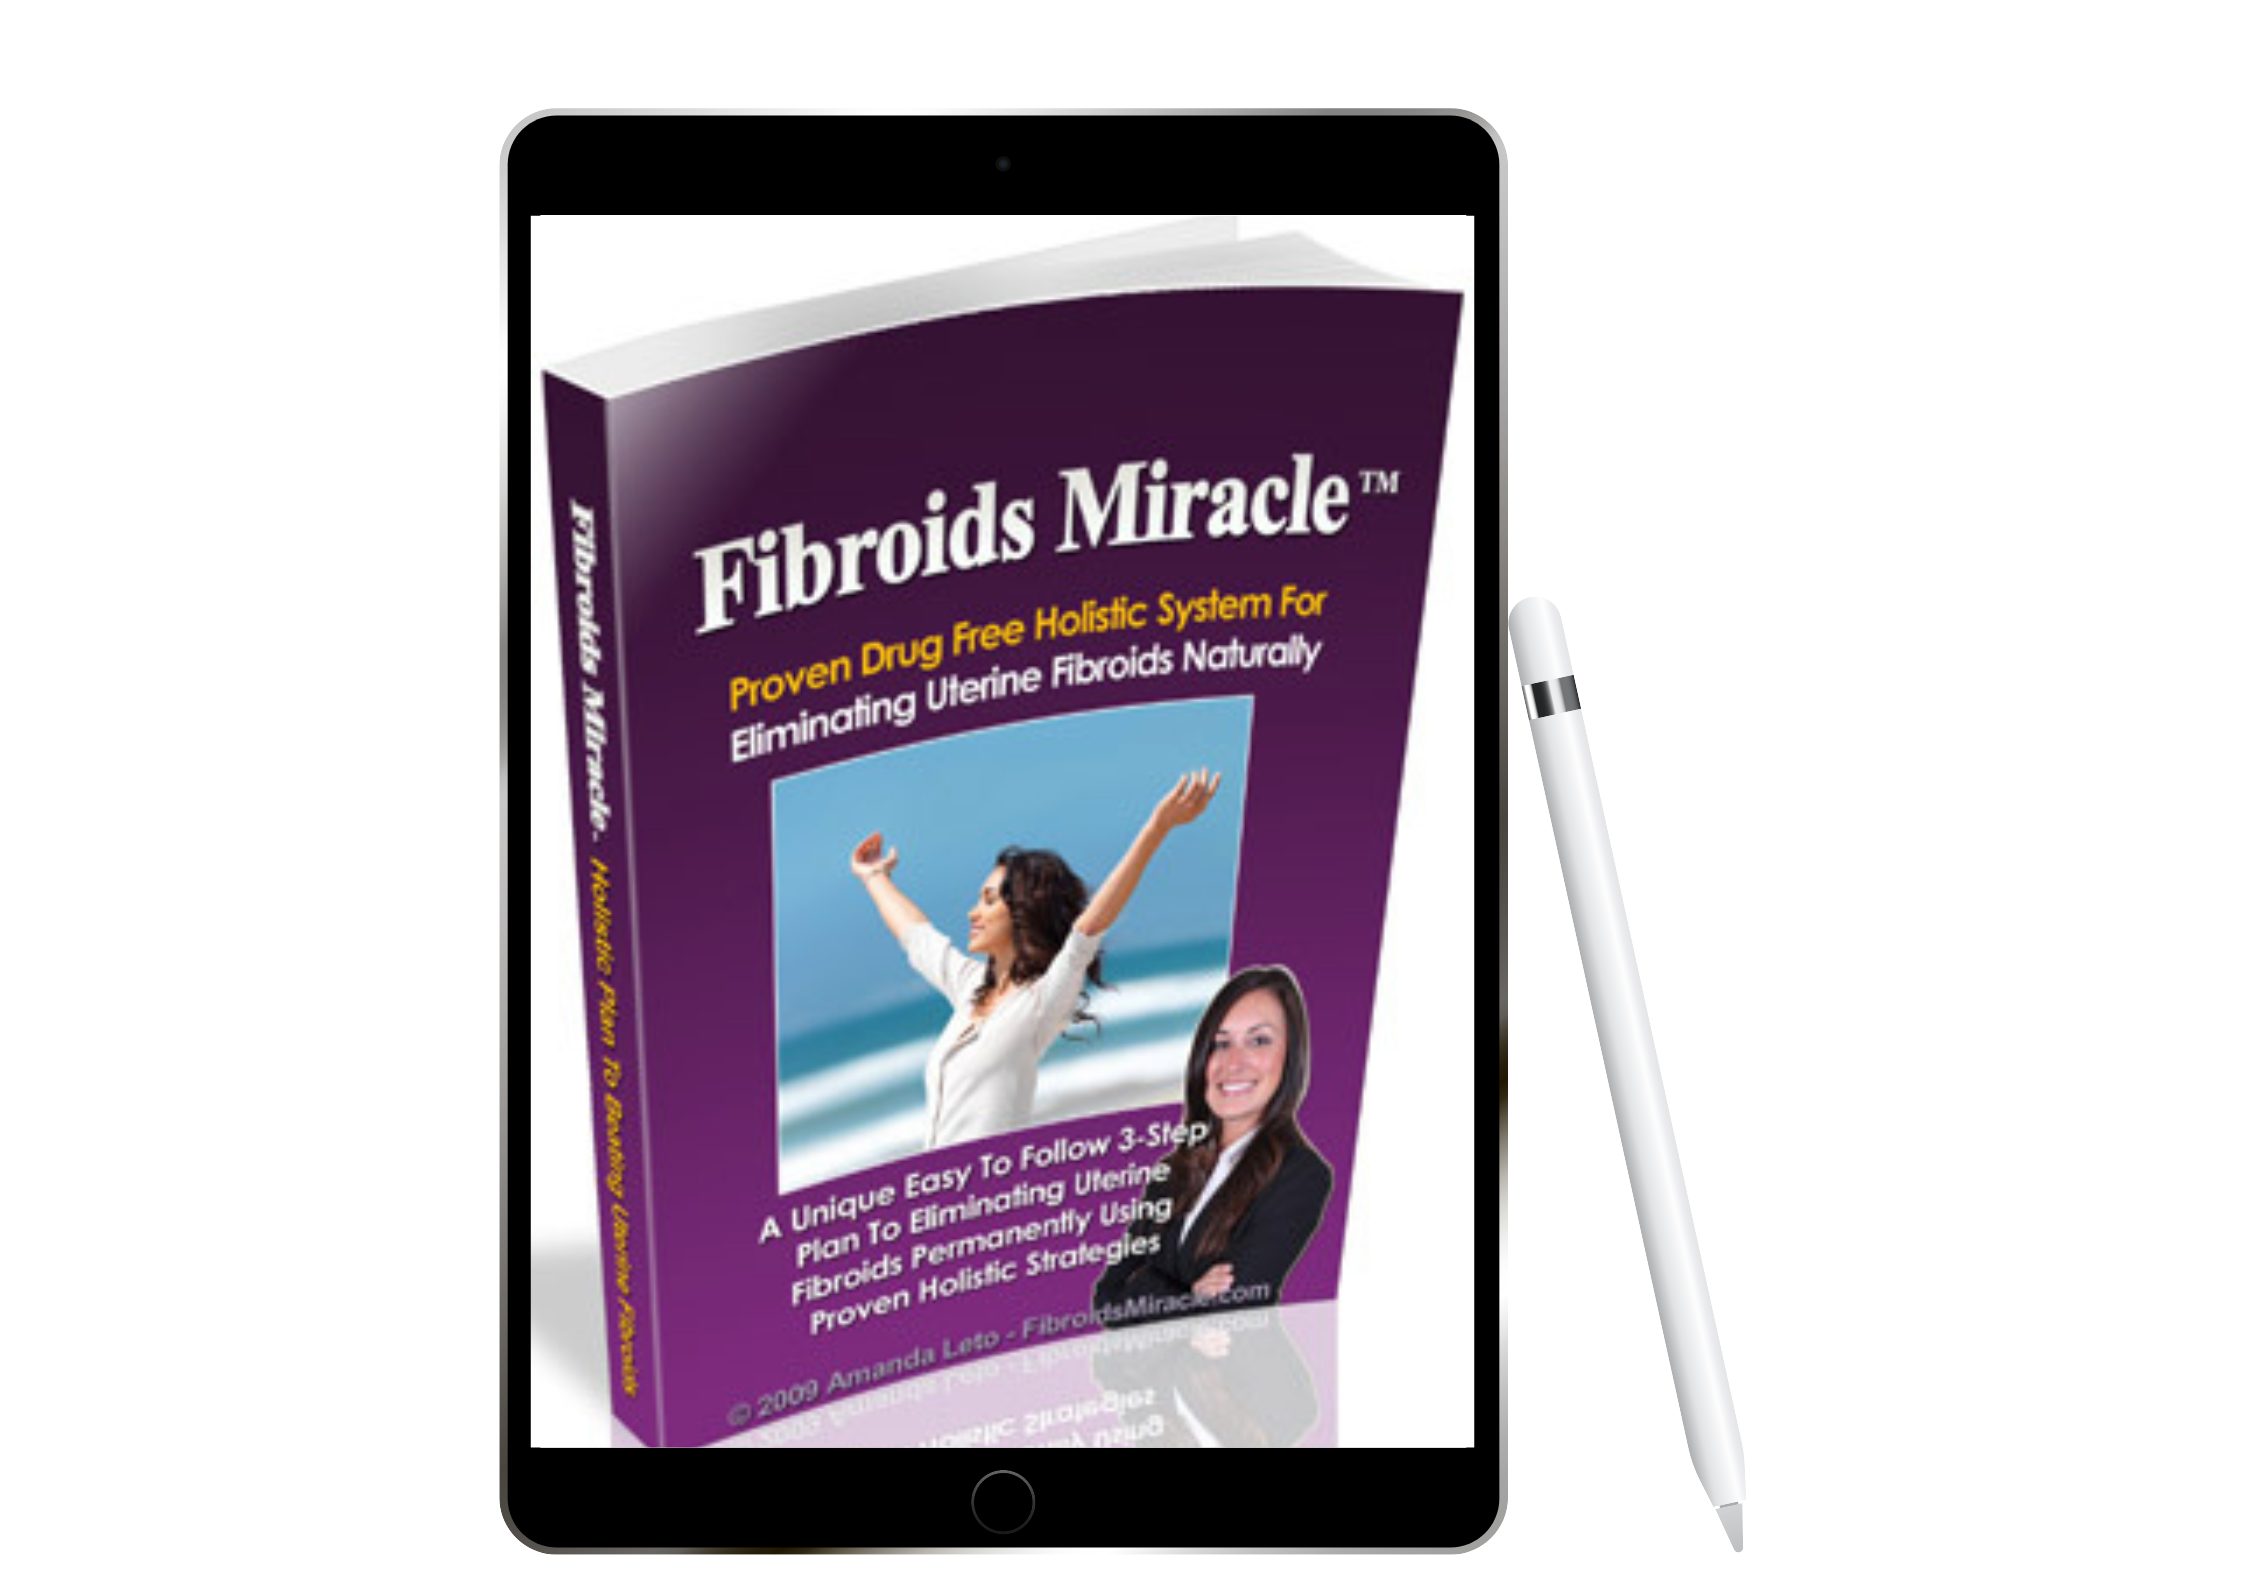 Fibroids Miracle reviews